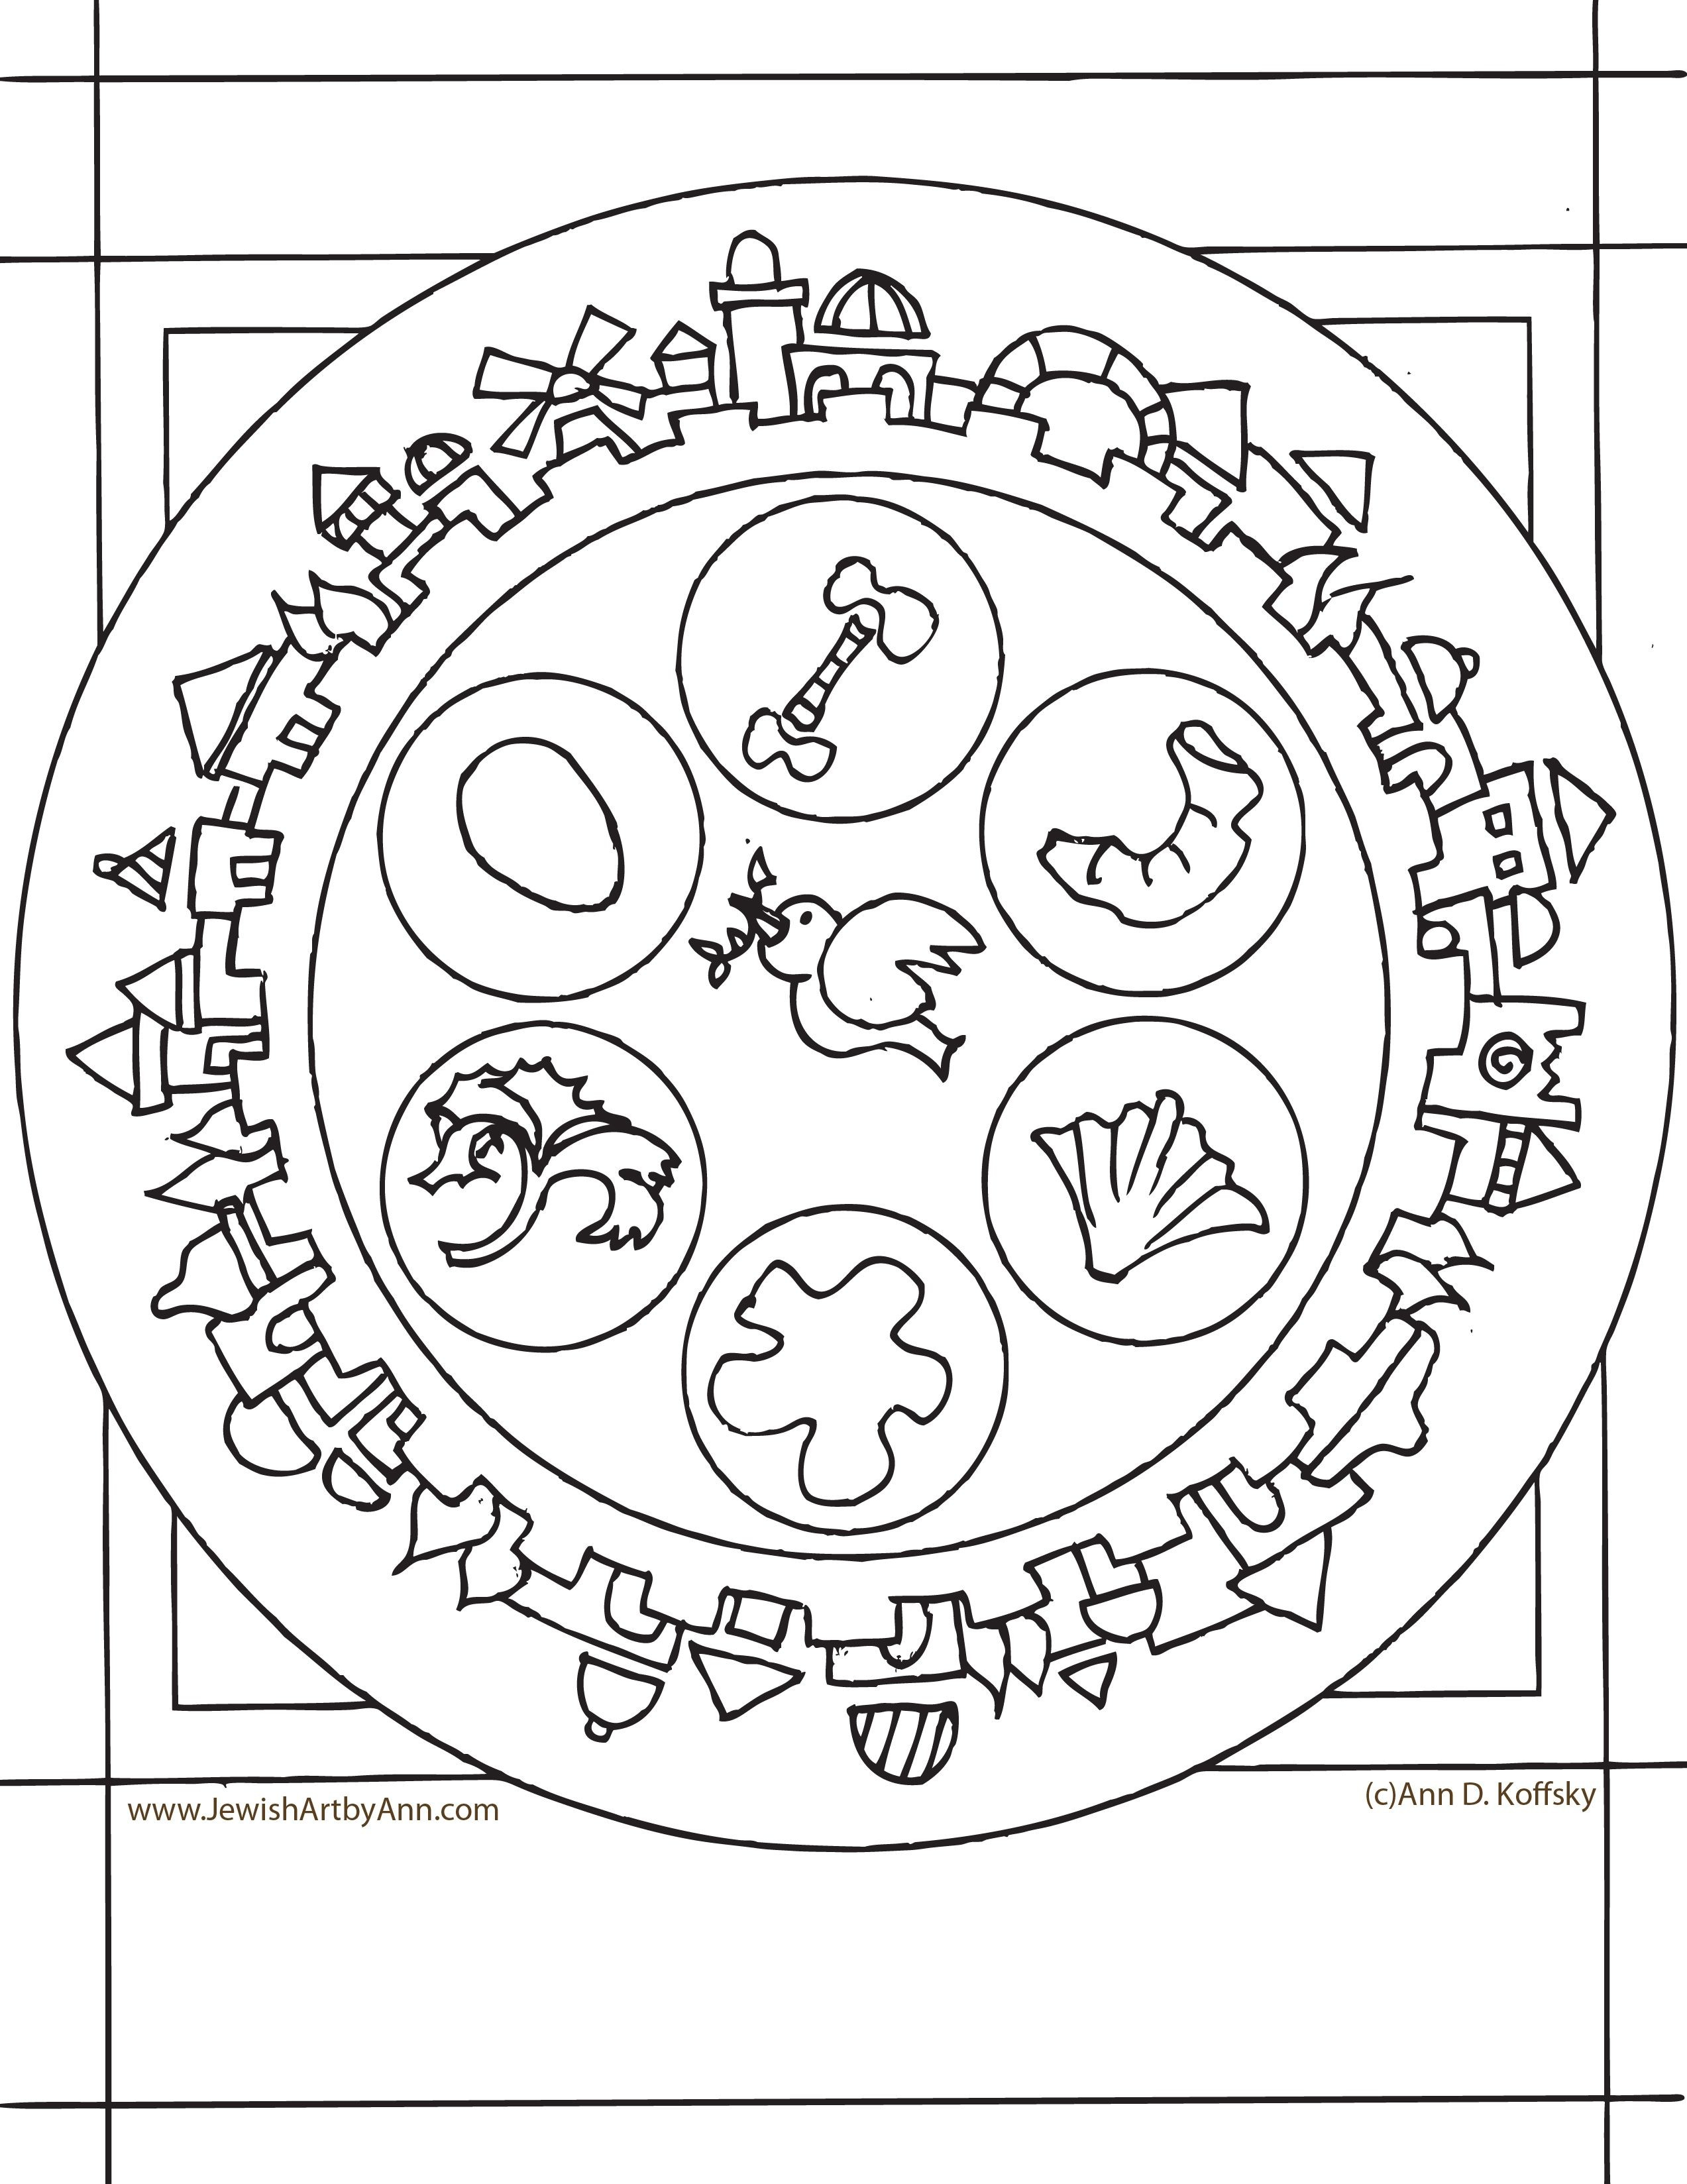 Food Pyramid Coloring Pages Food Pyramid 2015 Coloring Pages Awesome Ann Koffsky Passover Plate